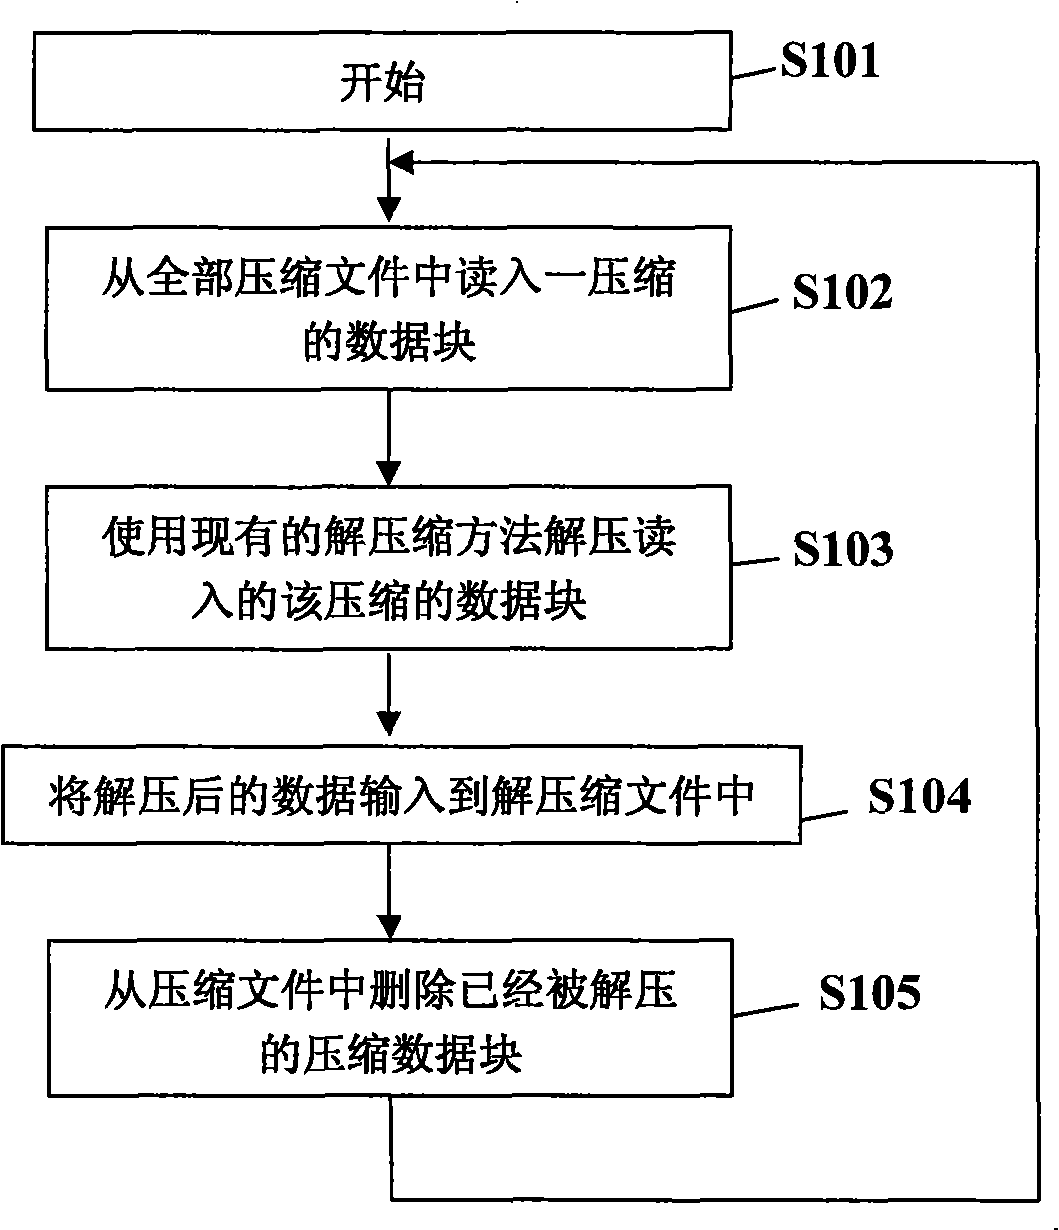 Method and system for reducing storage requirements during decompressing compressed file